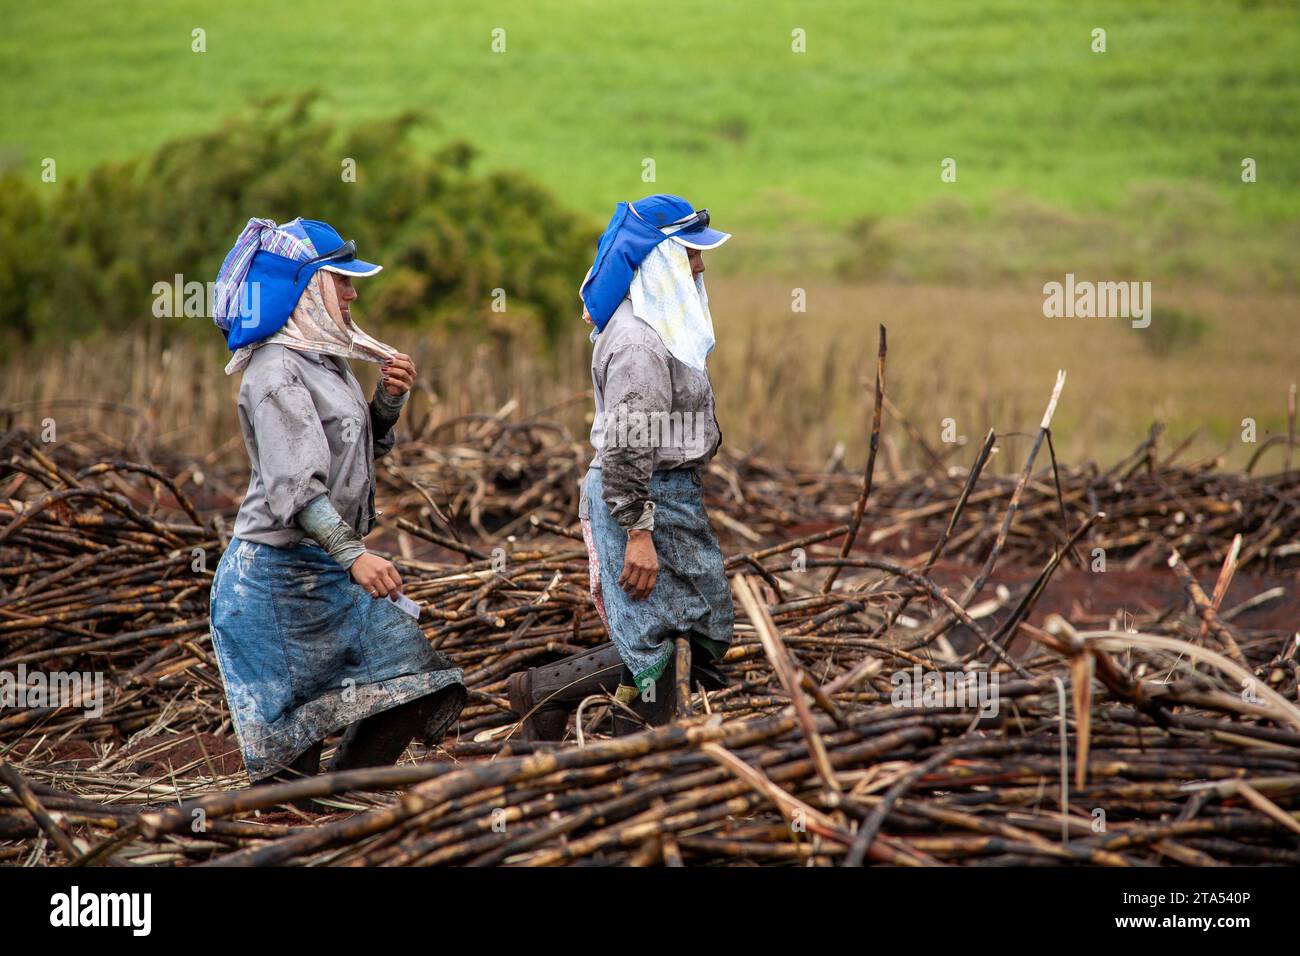 Women working as sugarcane cutters, known in Brazil by the expression boia-fria, unregistered rural worker hired temporarily who eats homemade meals at the workplace. Boia is a popular Brazilian name for meal or food and fria means cold. Sao Manoel, Sao Paulo State, Brazil. Stock Photo